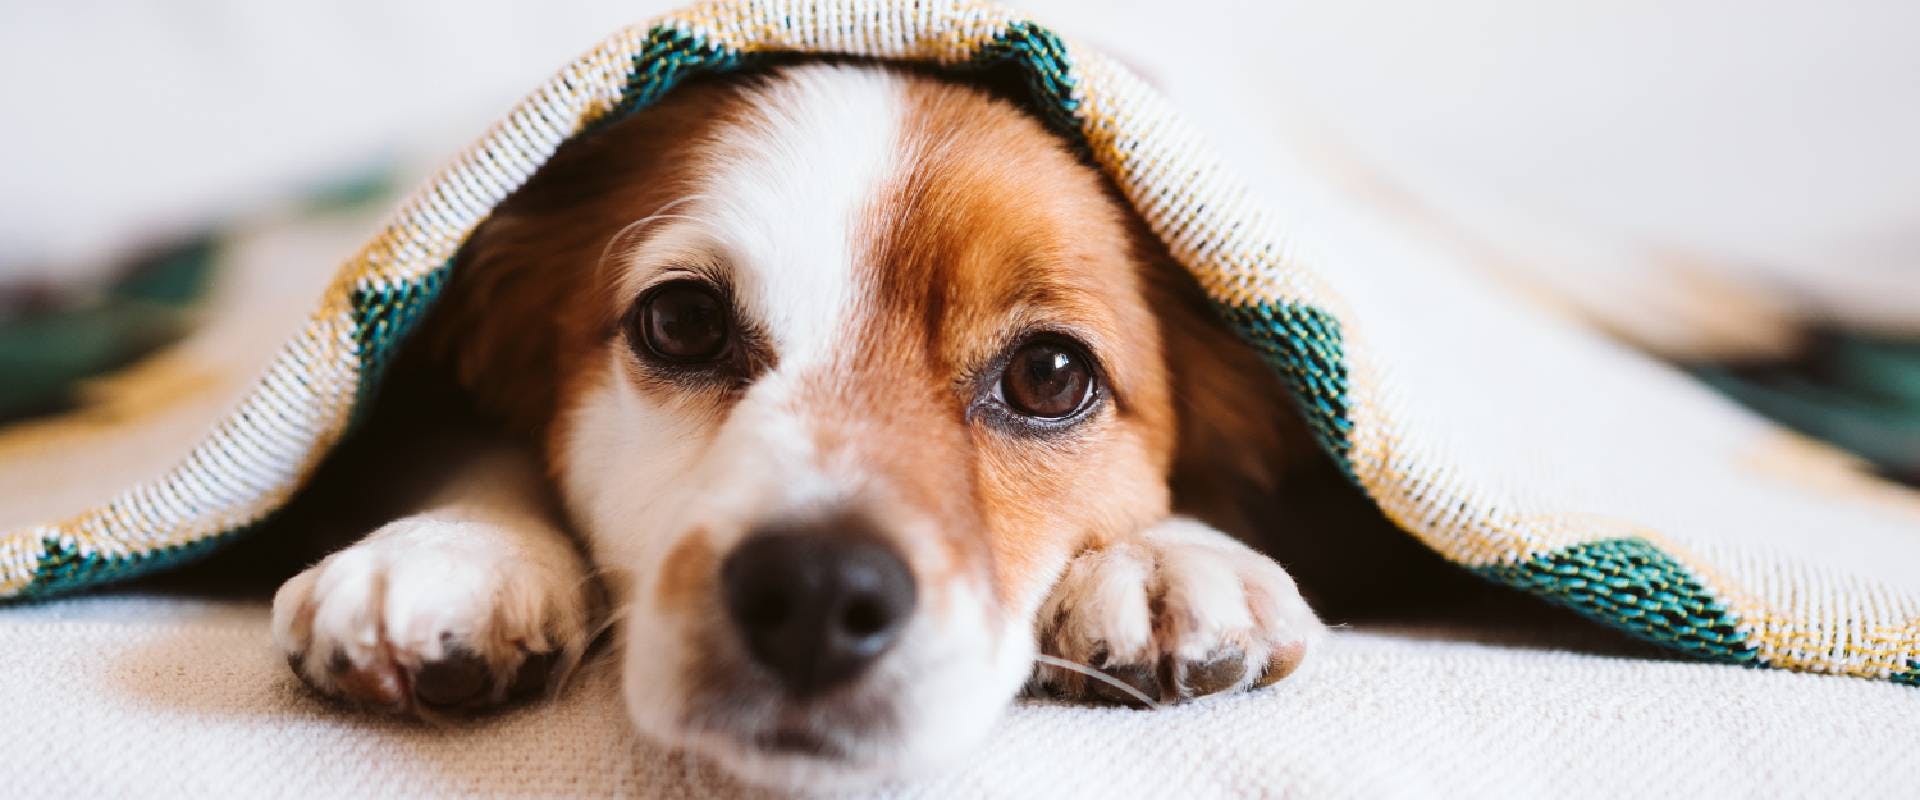 Close-up of a Jack Russell under a blanket